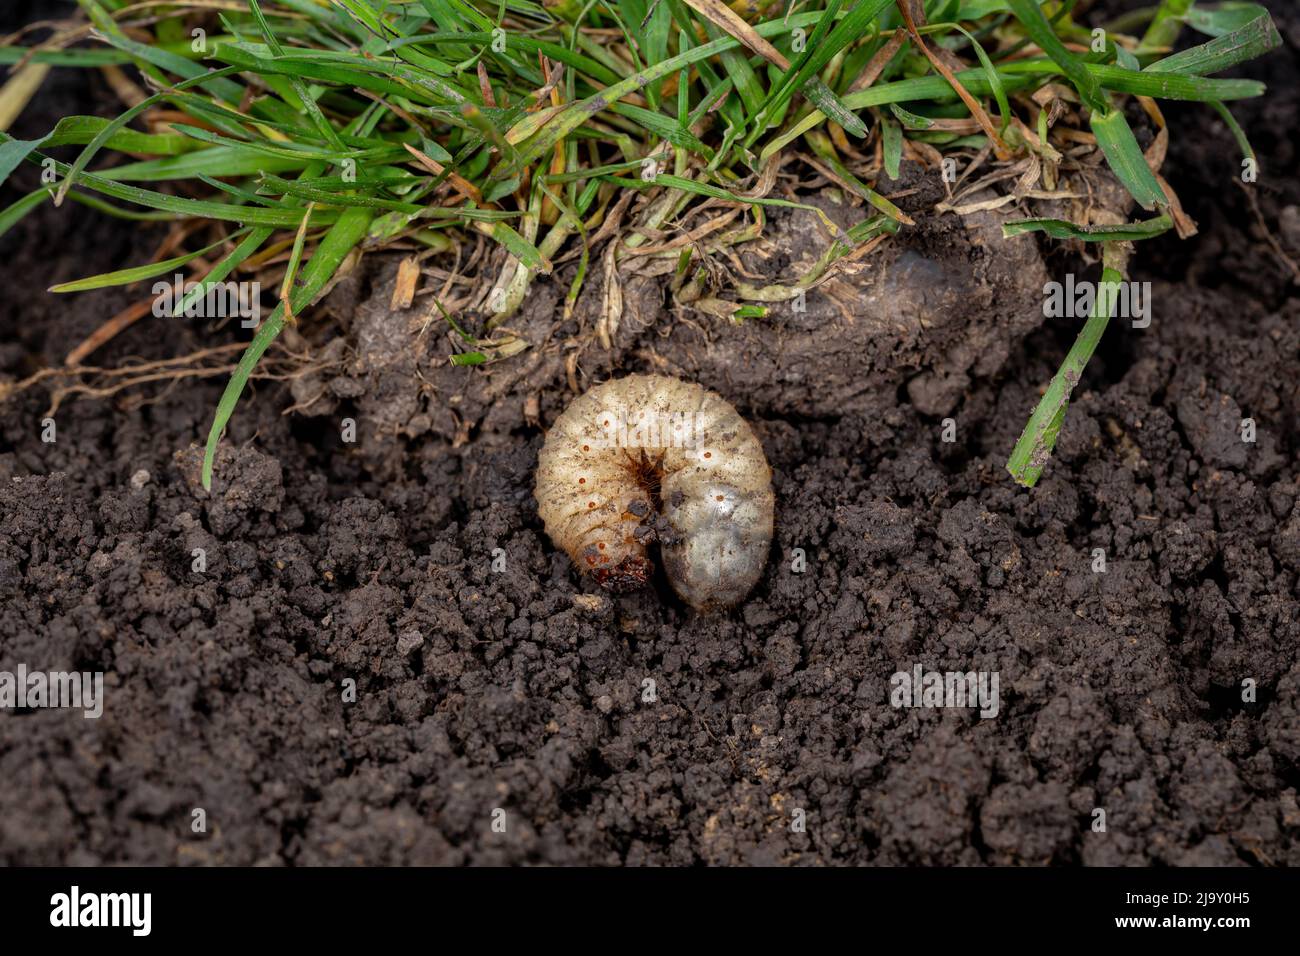 White lawn grub in soil with grass. Lawncare, insect and pest control concept. Stock Photo